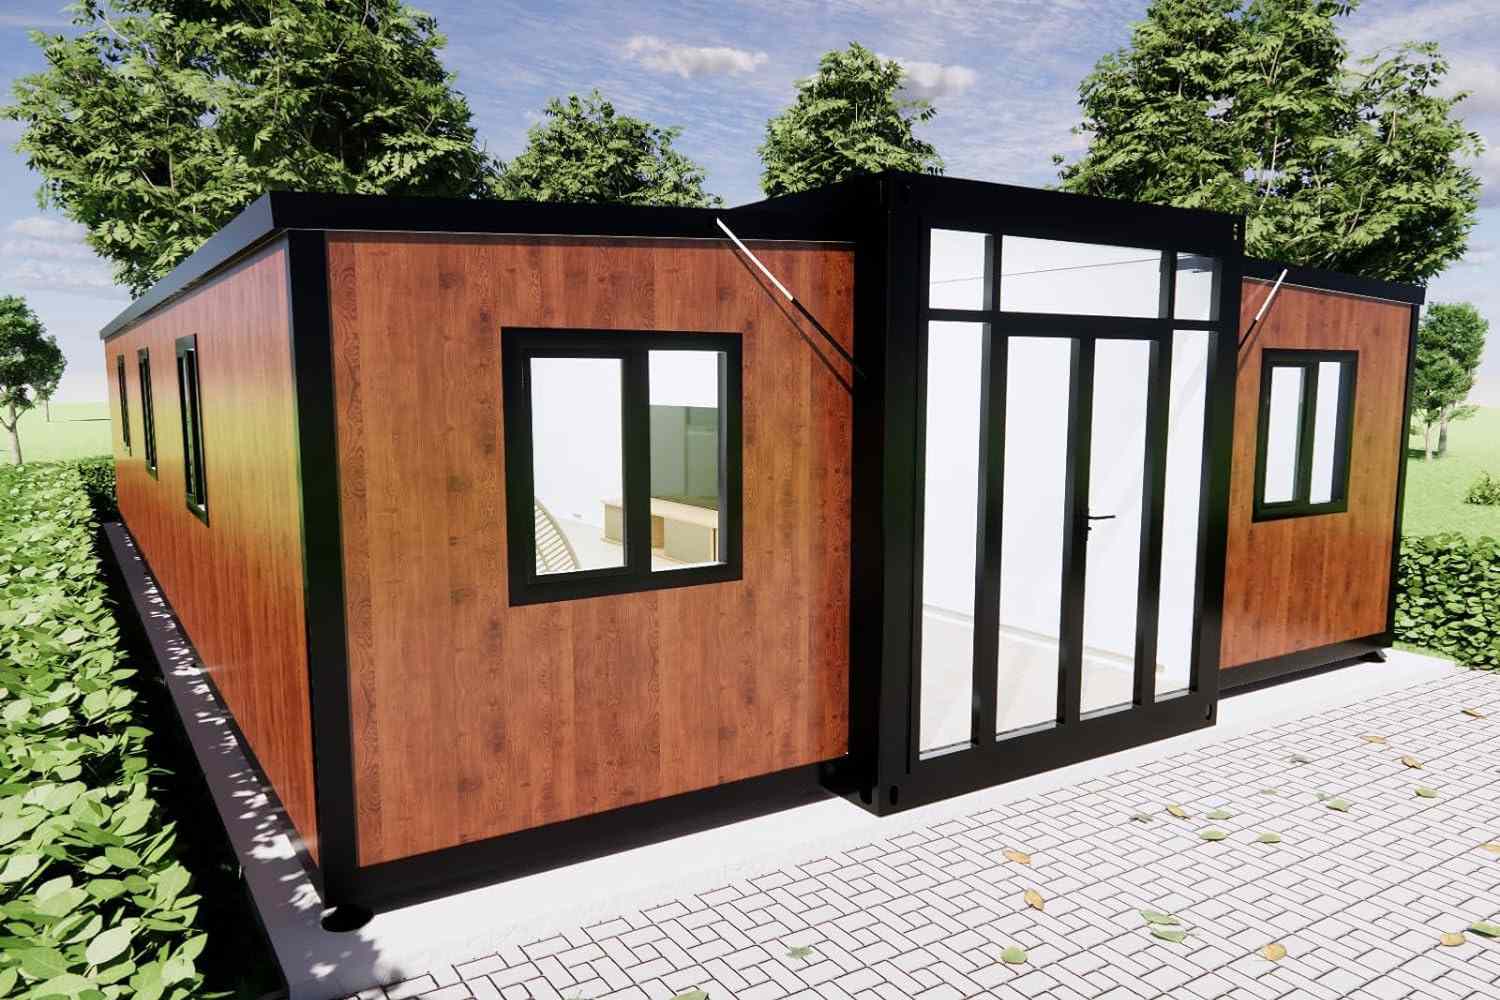 This Modern Tiny House Is Sleek, and It Comes With Electricity, Heat, and Water